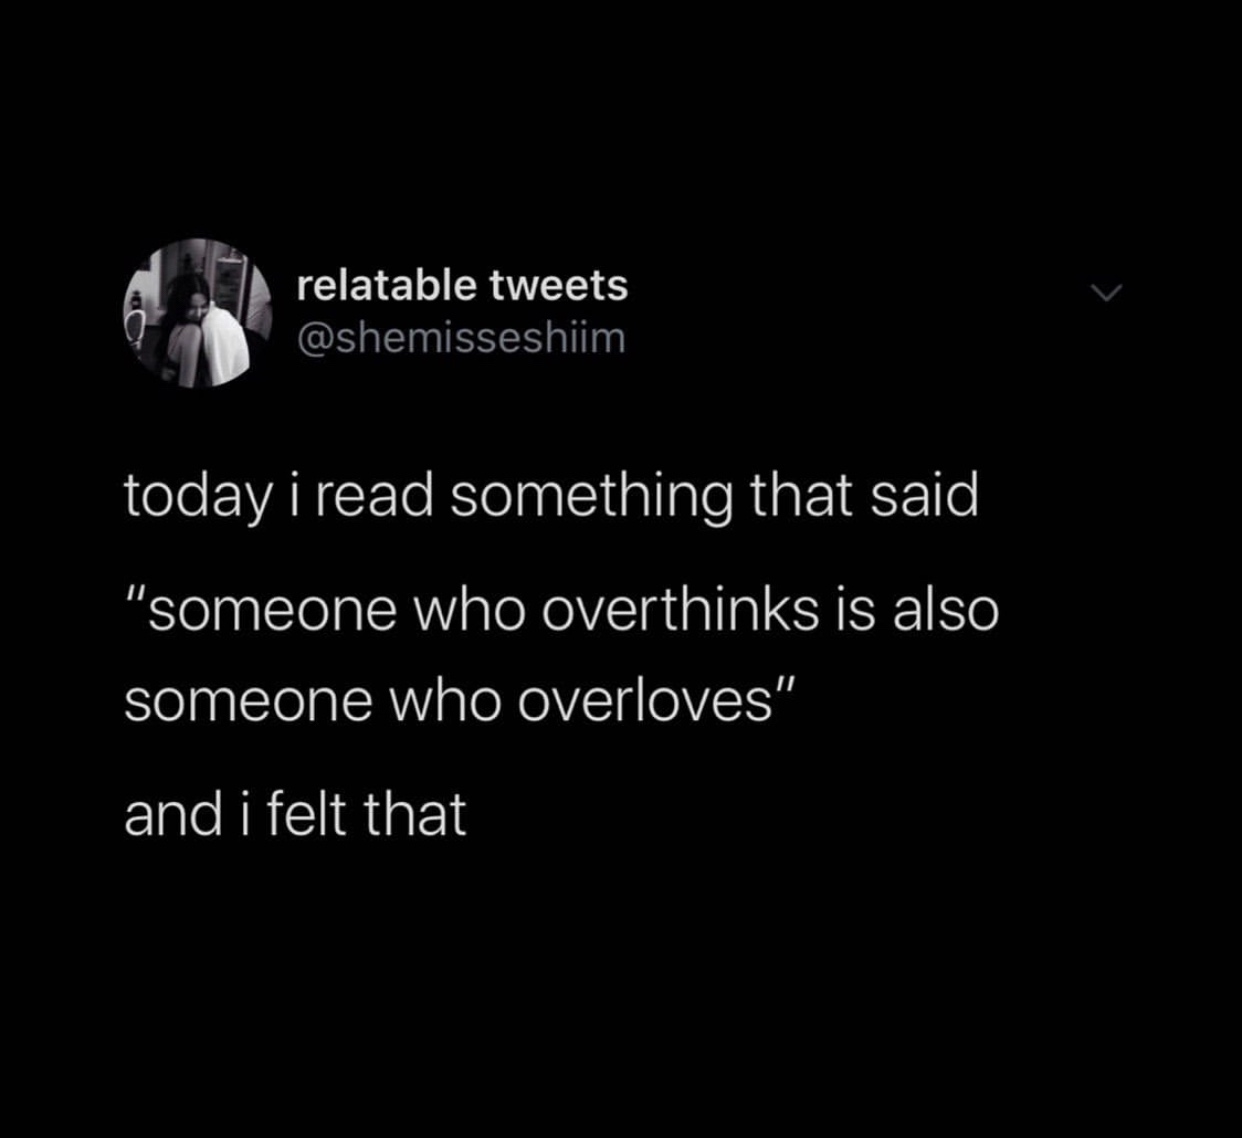 today i read something that said someone - relatable tweets today i read something that said "someone who overthinks is also someone who overloves" and i felt that